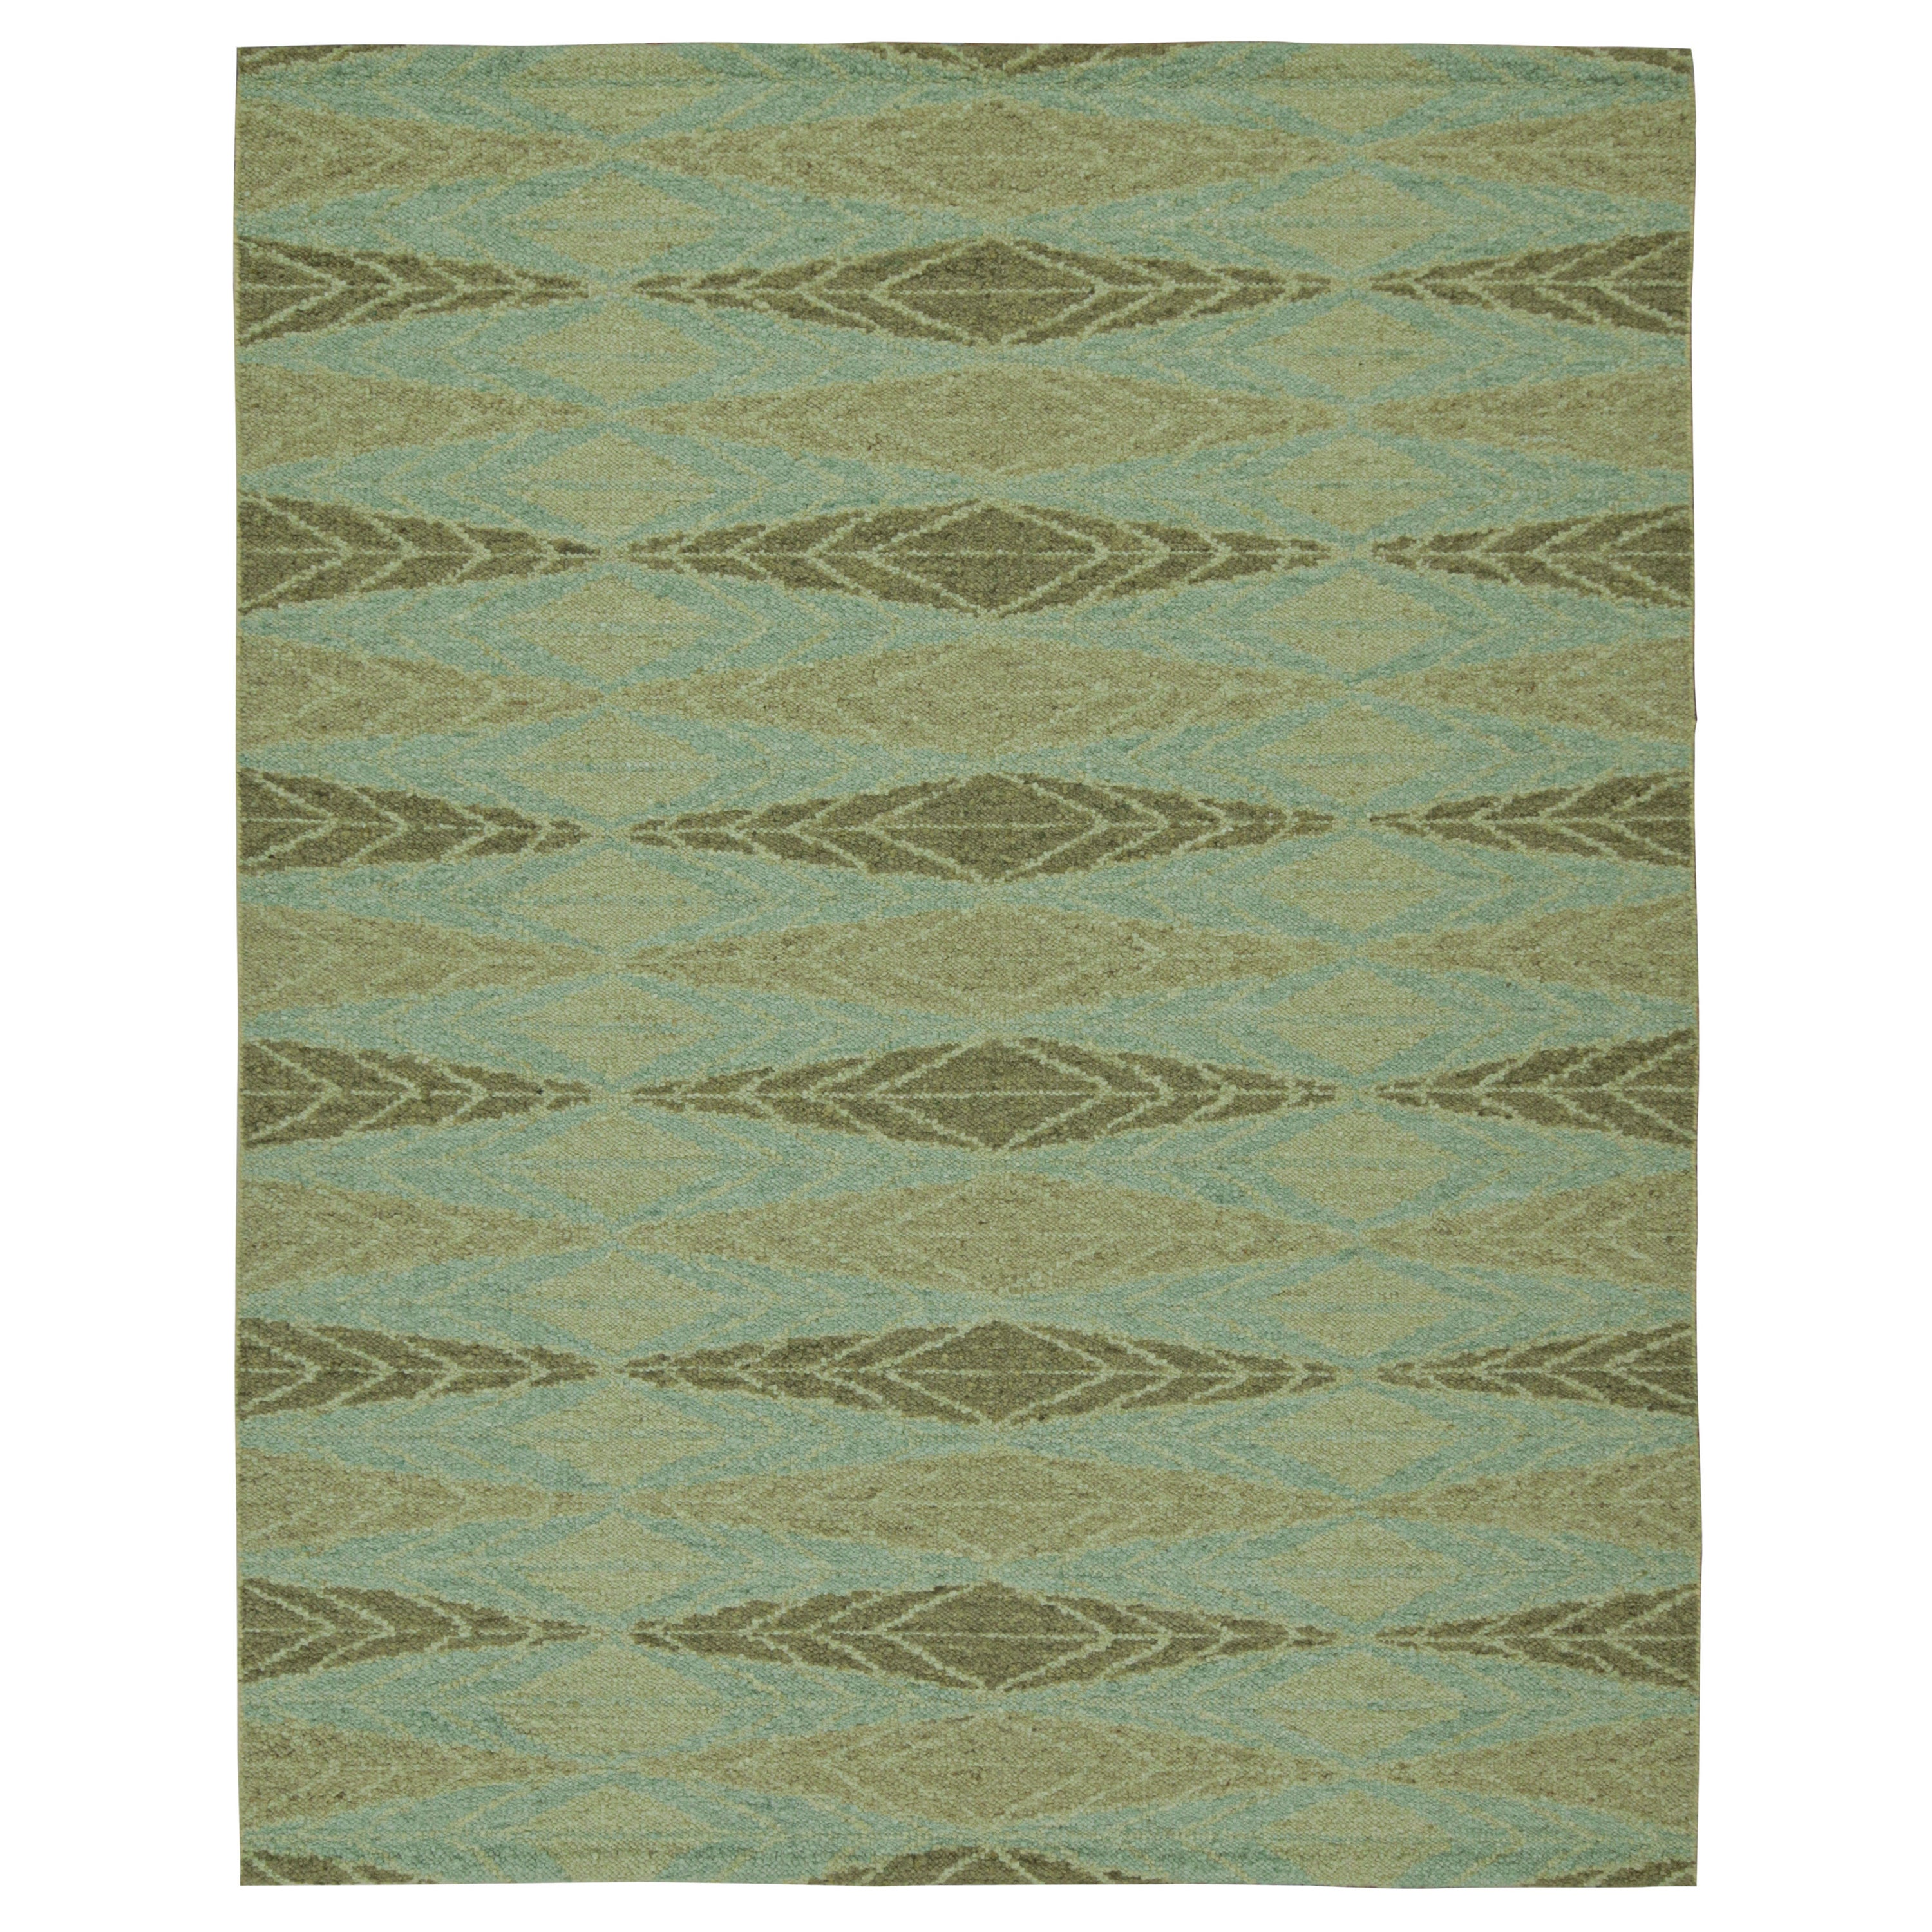 Rug & Kilim’s Scandinavian Style Kilim with Green Geometric Patterns on Blue For Sale